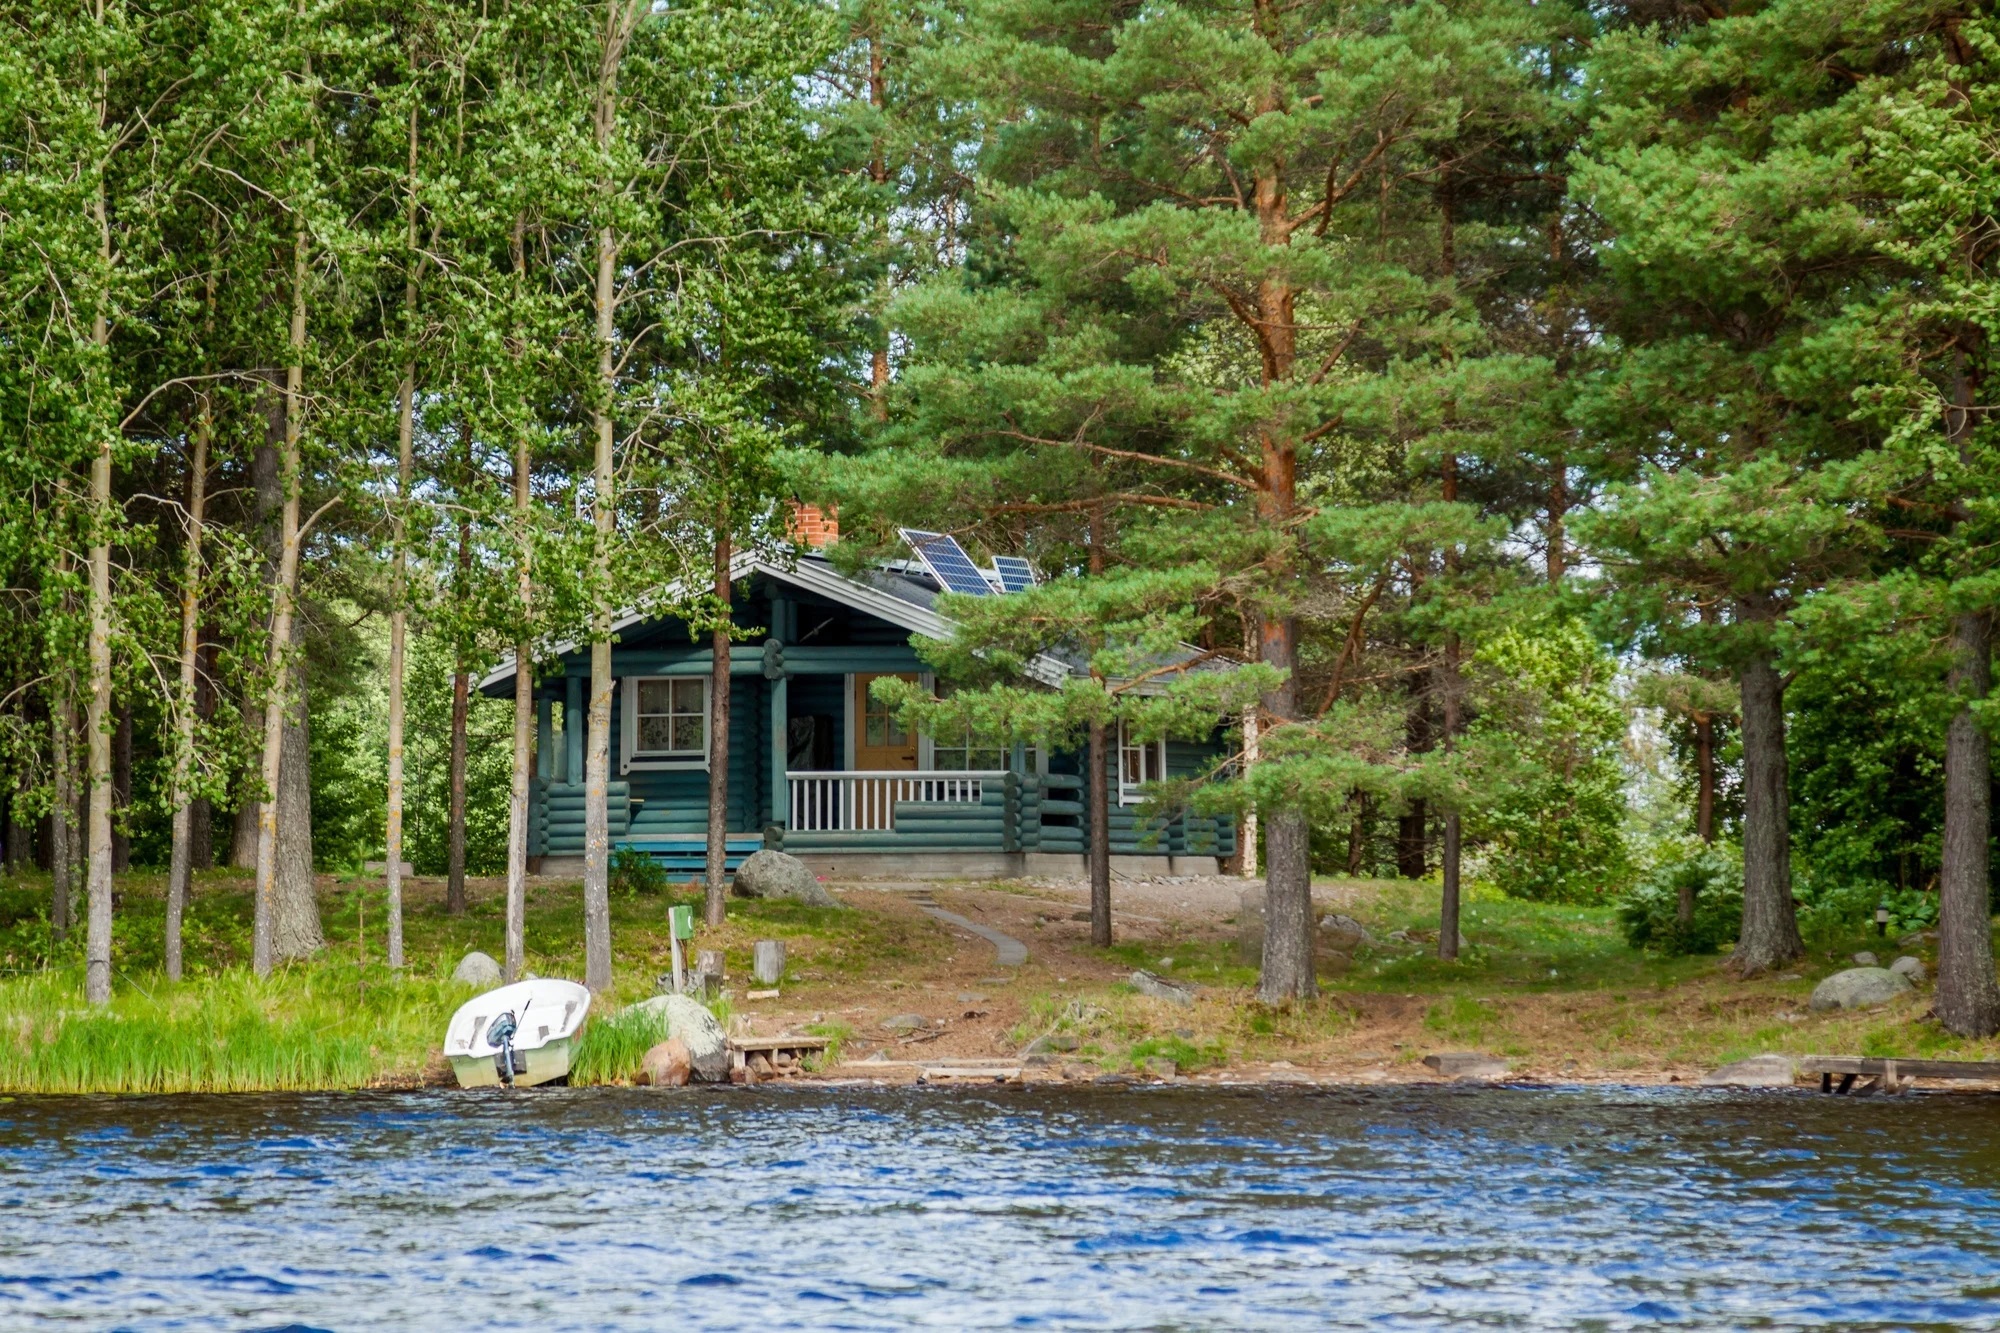 How To Describe Your Vacation Rental Lake House for Maximum Appeal